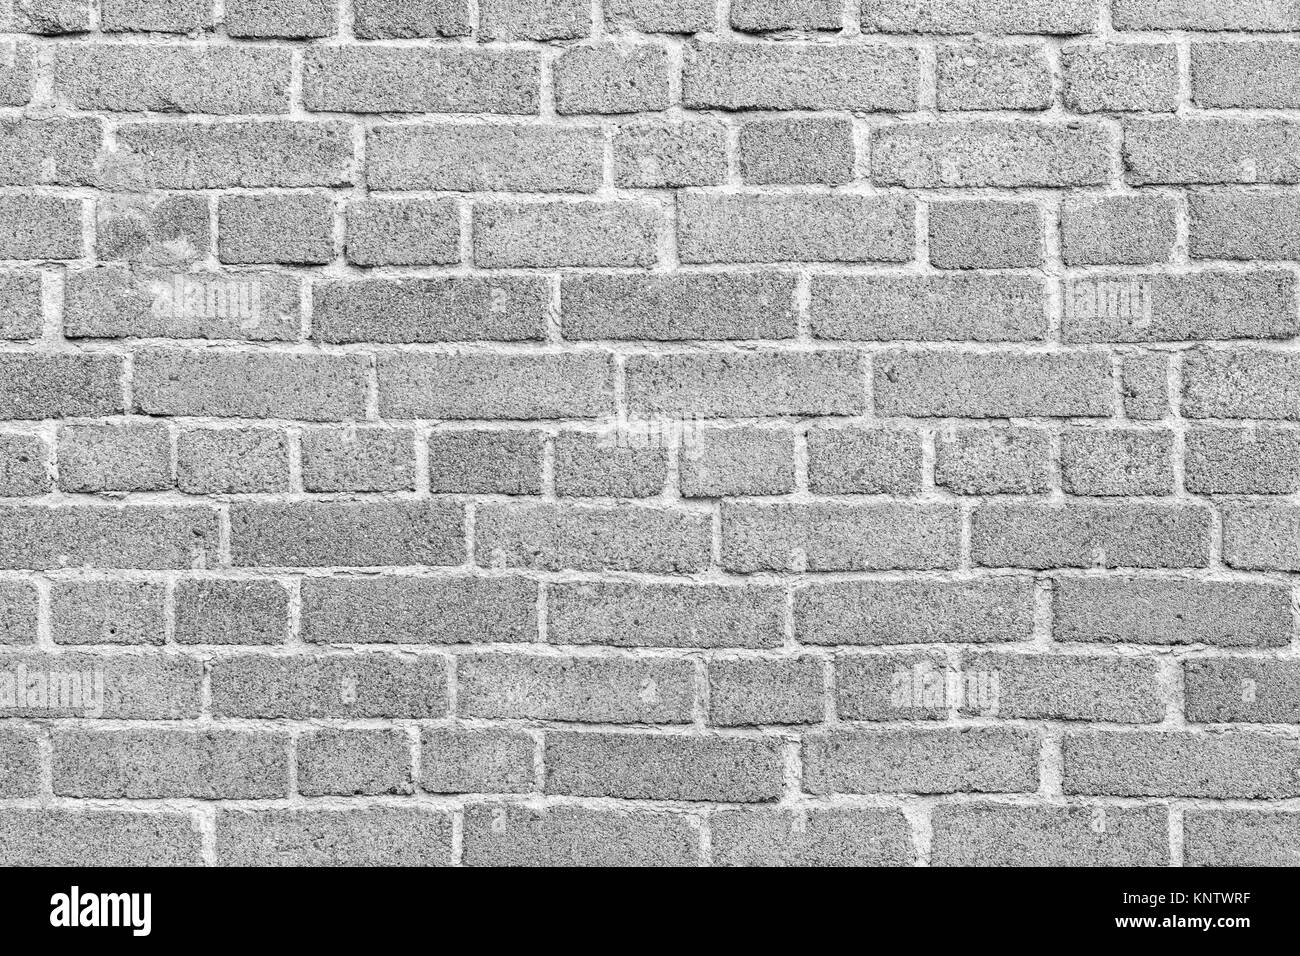 Brick wall texture background in black and white. Stock Photo